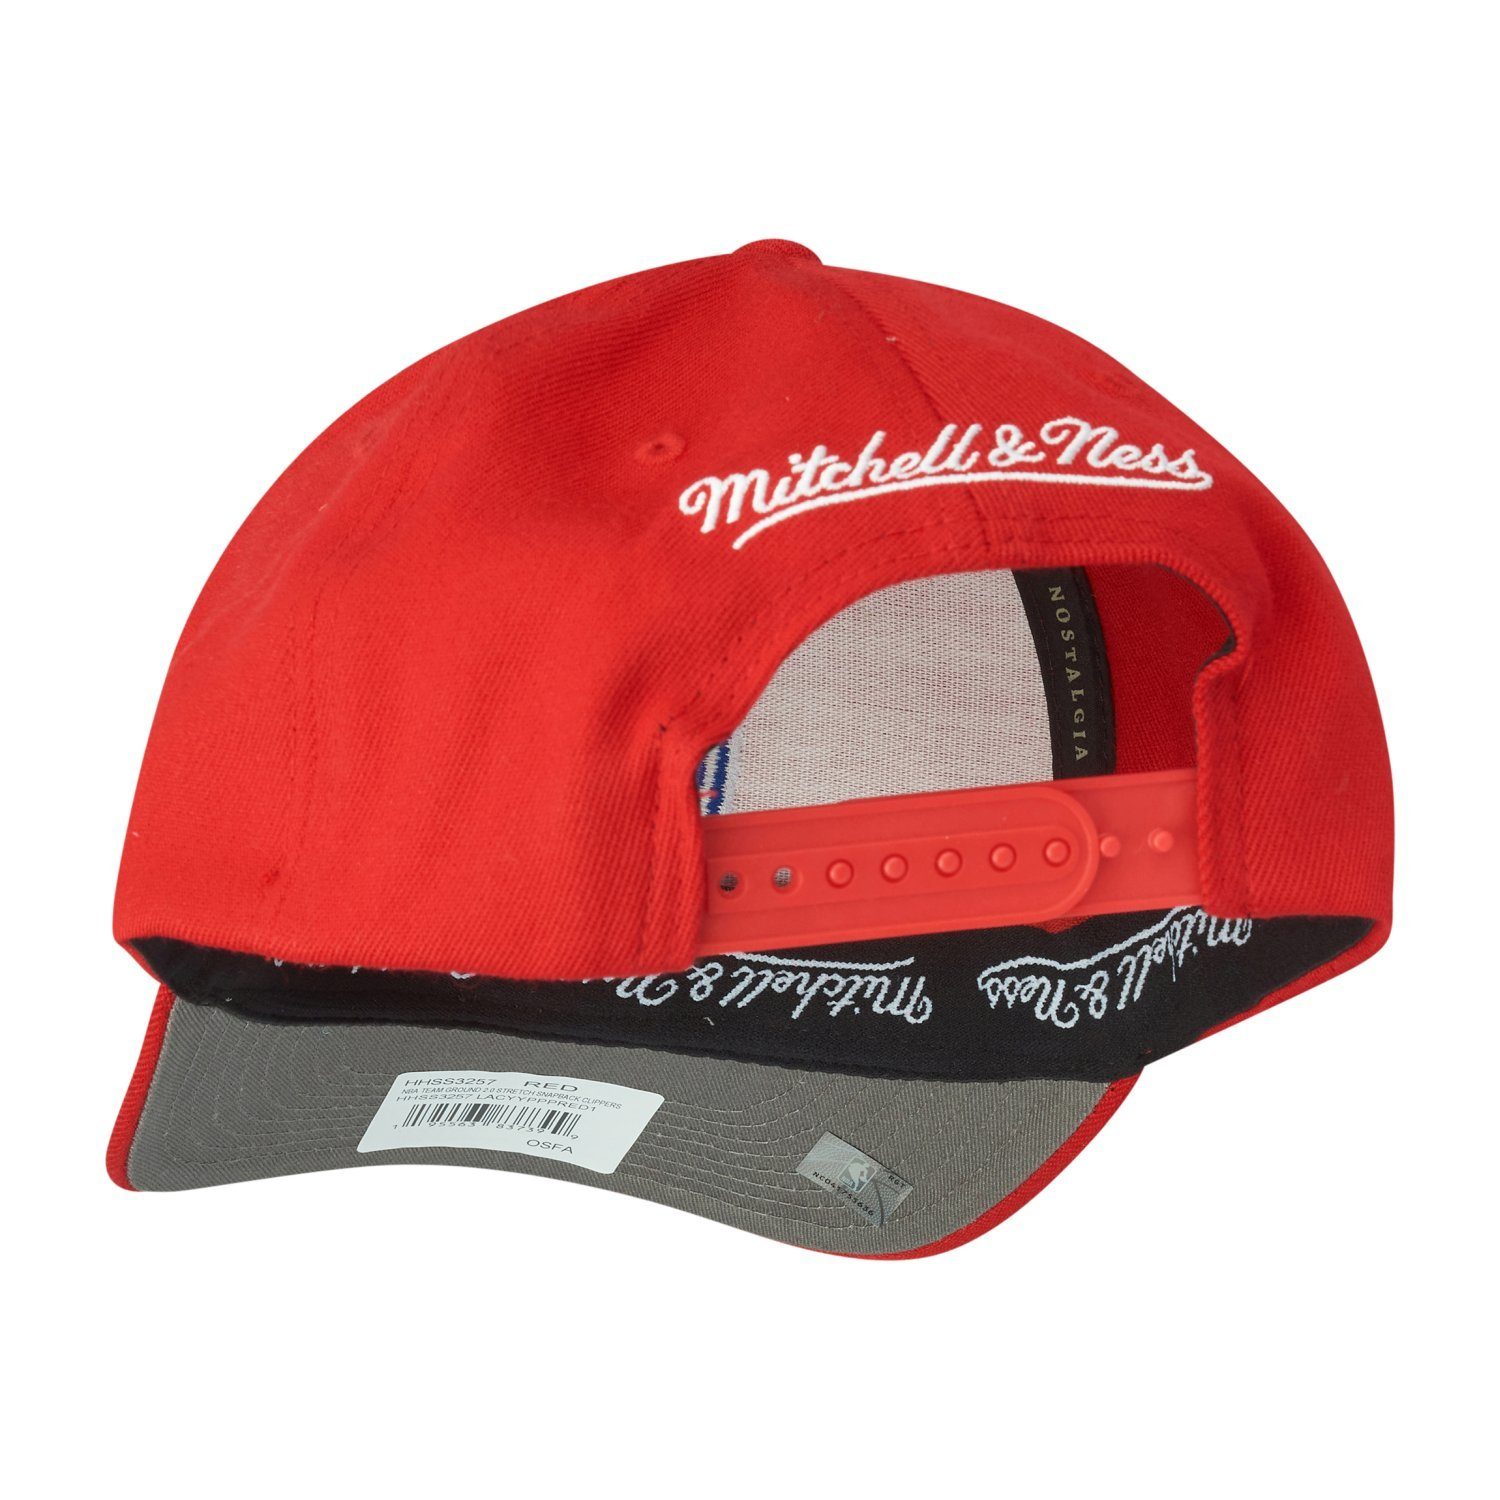 Stretch Mitchell Los 2.0 Ness Clippers Snapback Cap & Angeles